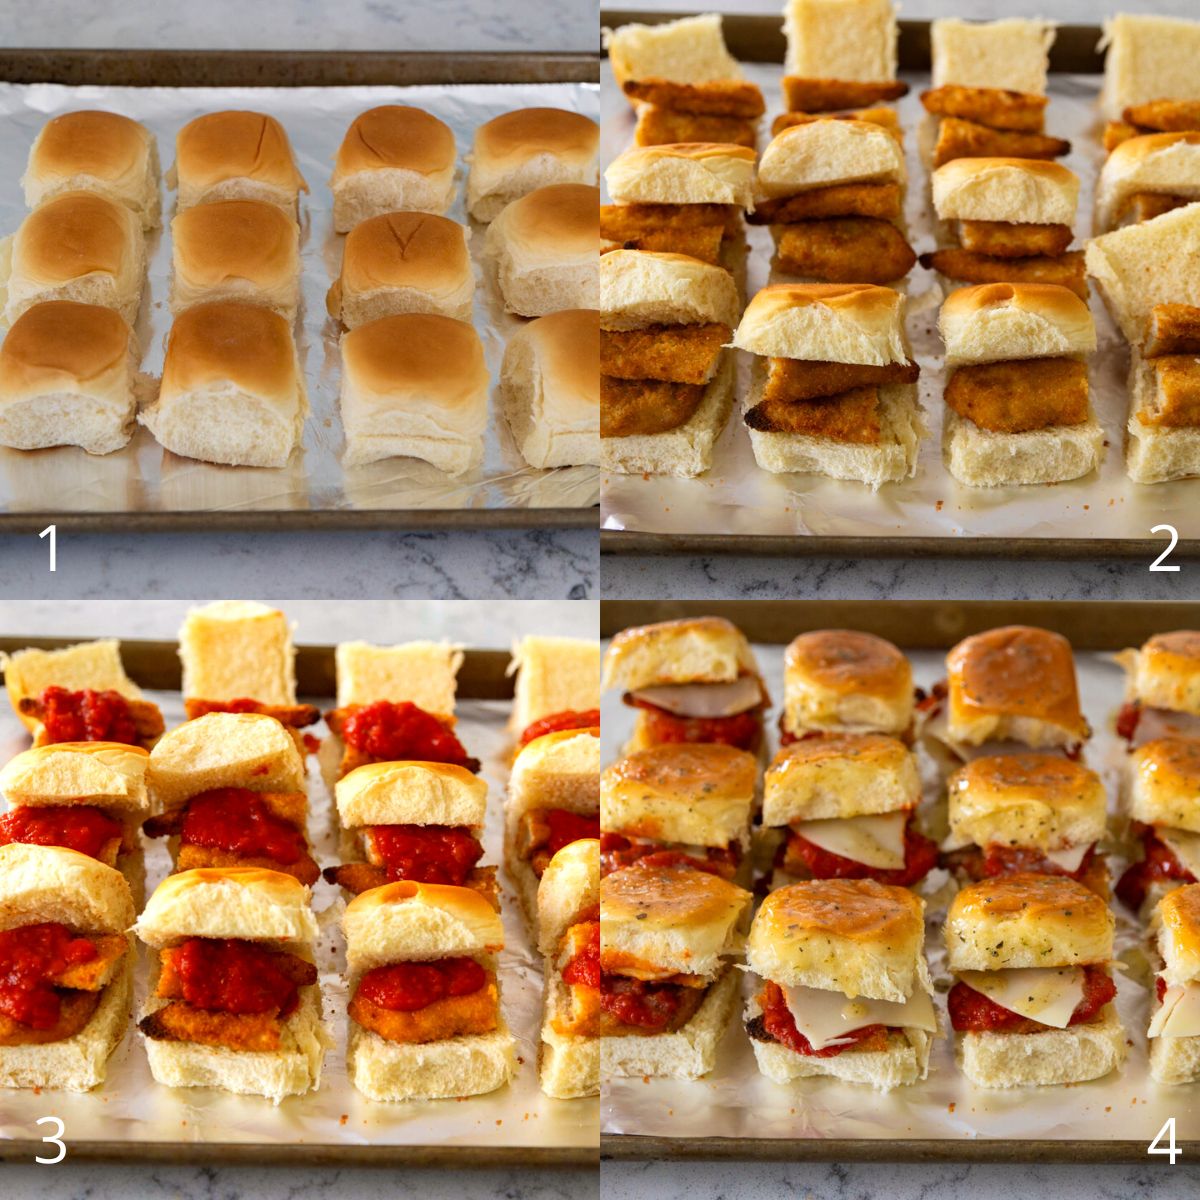 The step by step photo collage shows how to assemble the chicken parm sliders for baking.